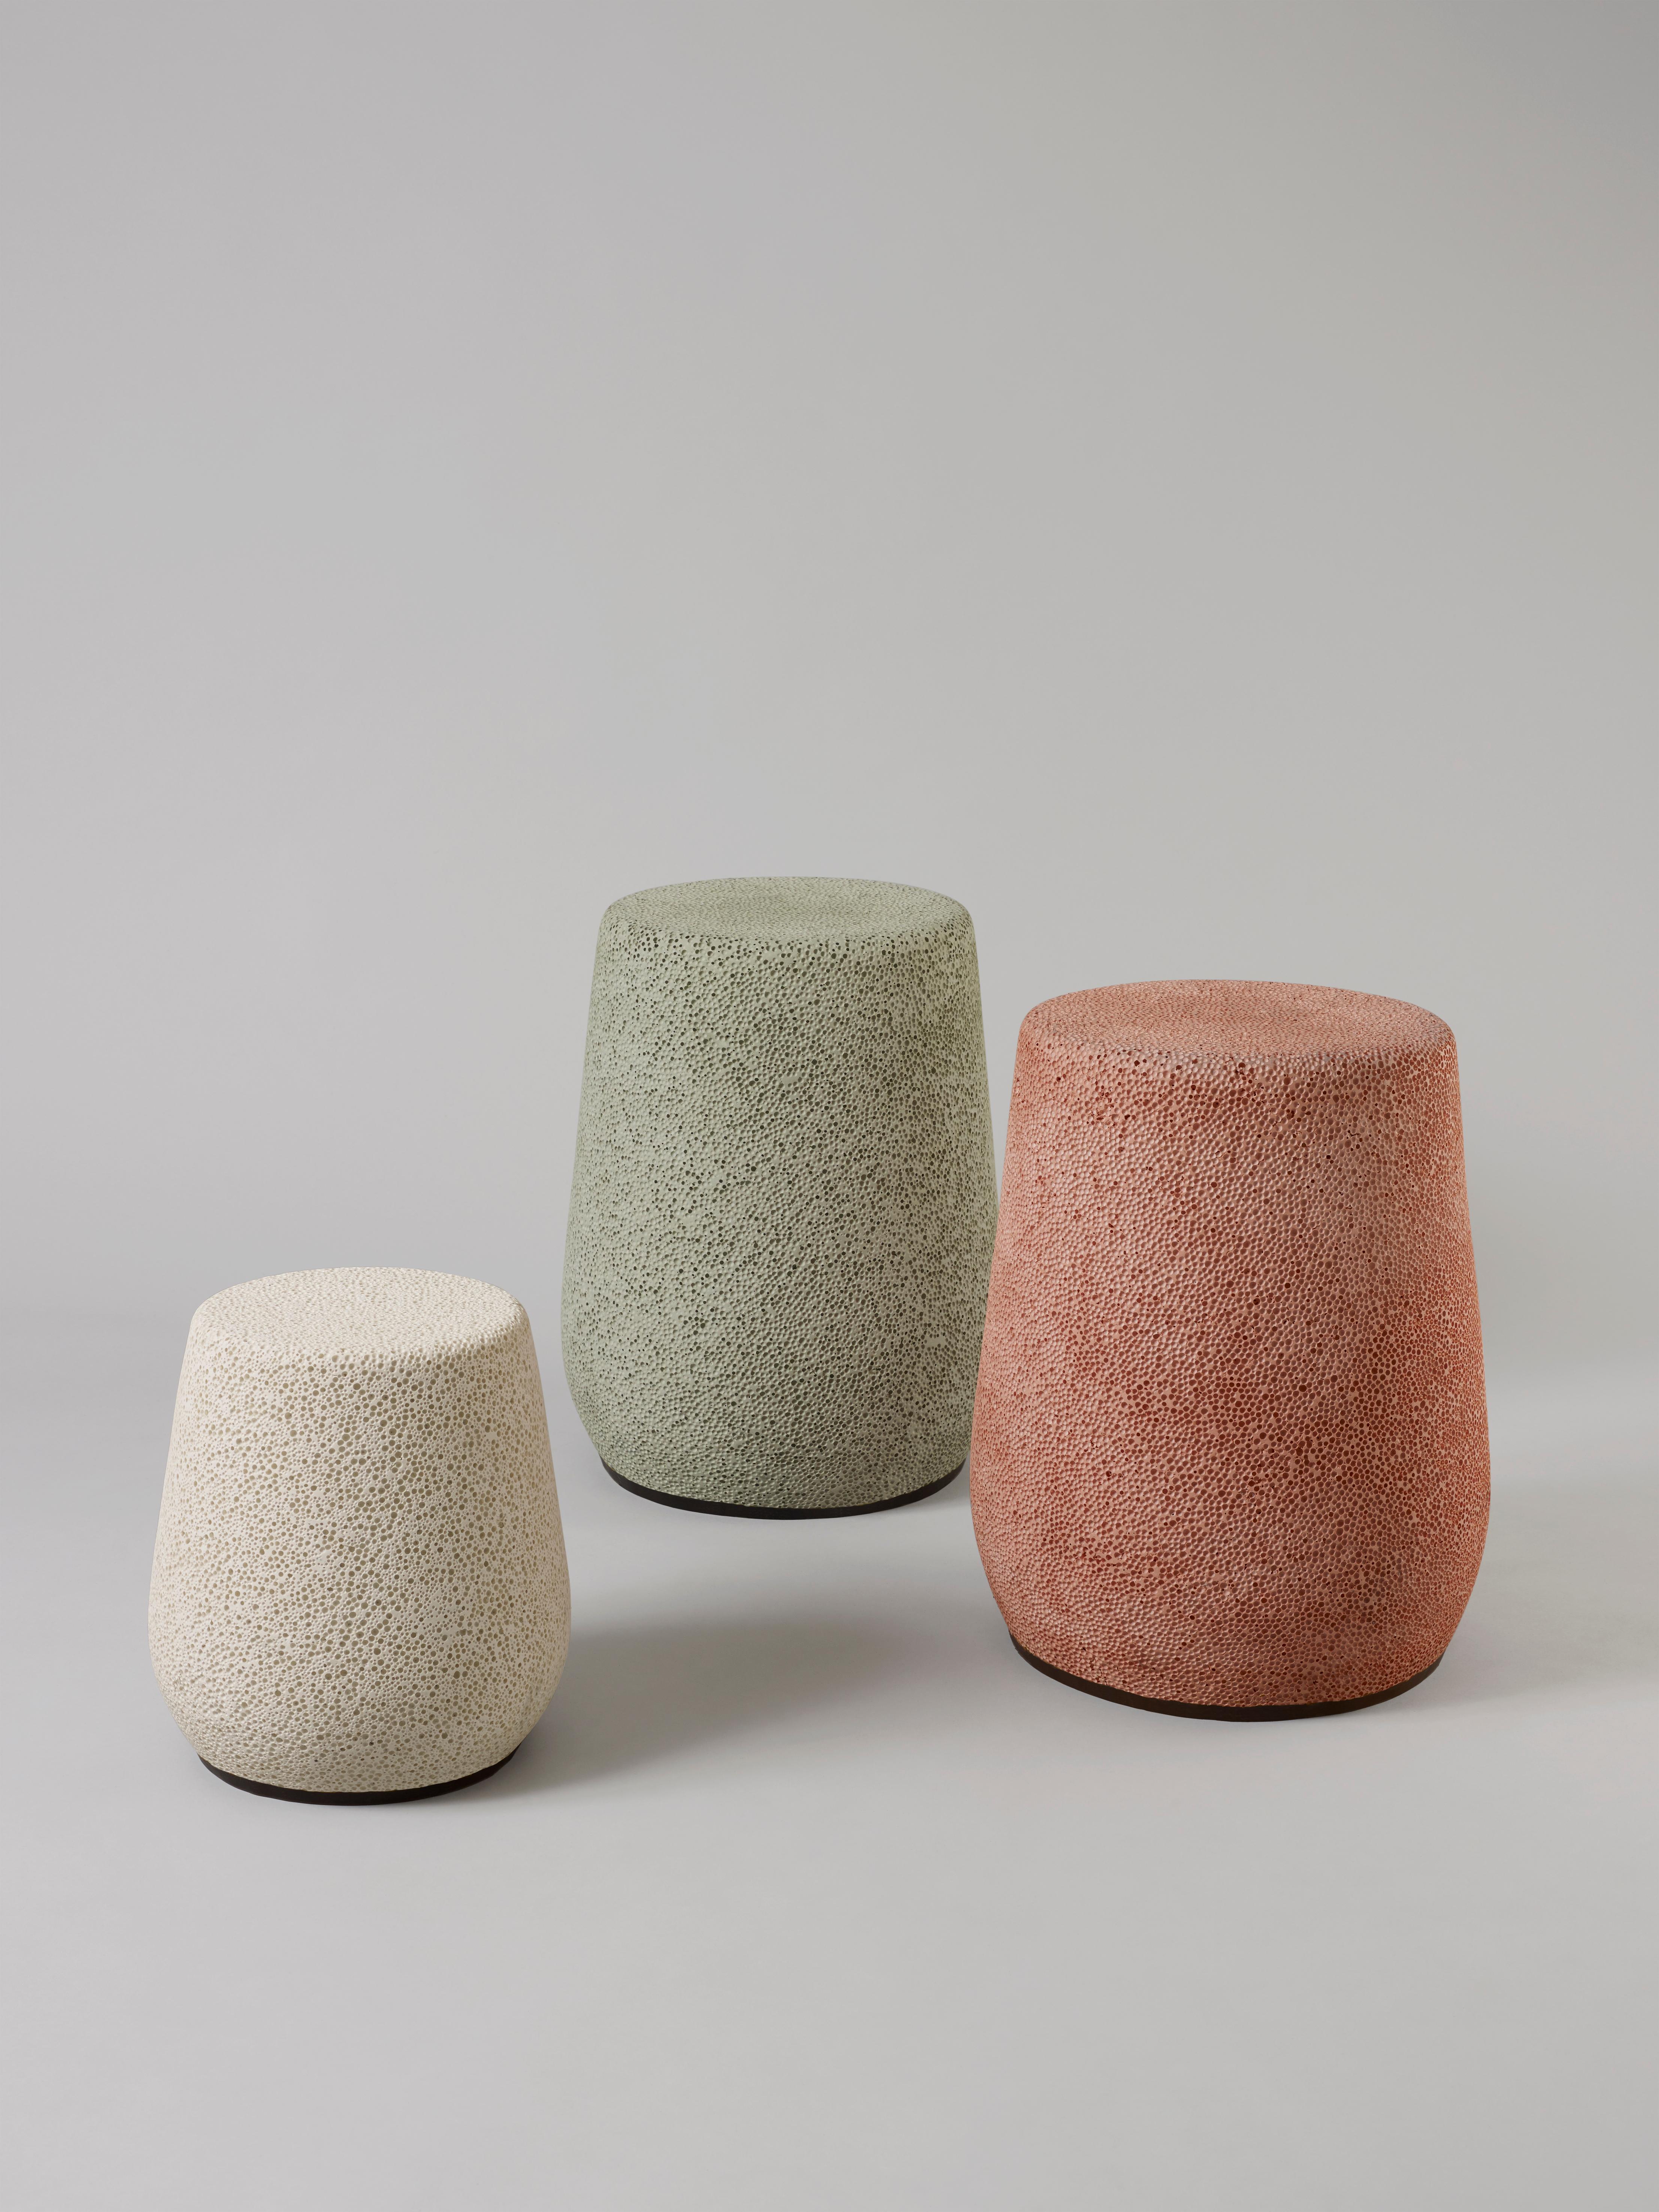 Contemporary 'Lightweight Porcelain' Stool and Side Table by Djim Berger - Coral Pink